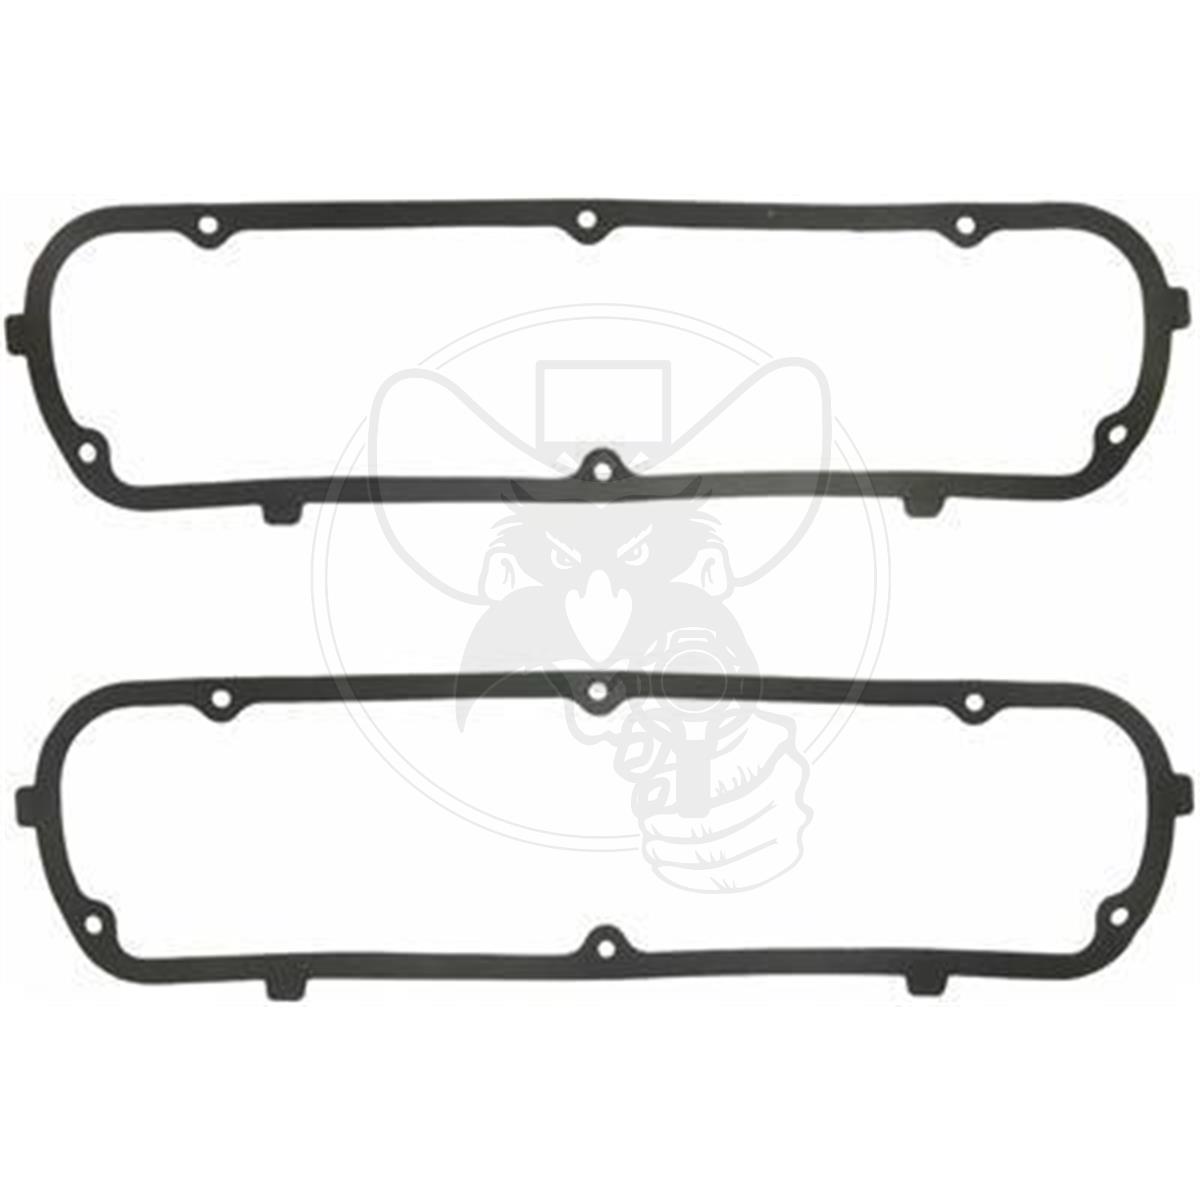 FELPRO VALVE COVER GASKETS RUBBER FITS FORD WINDSOR